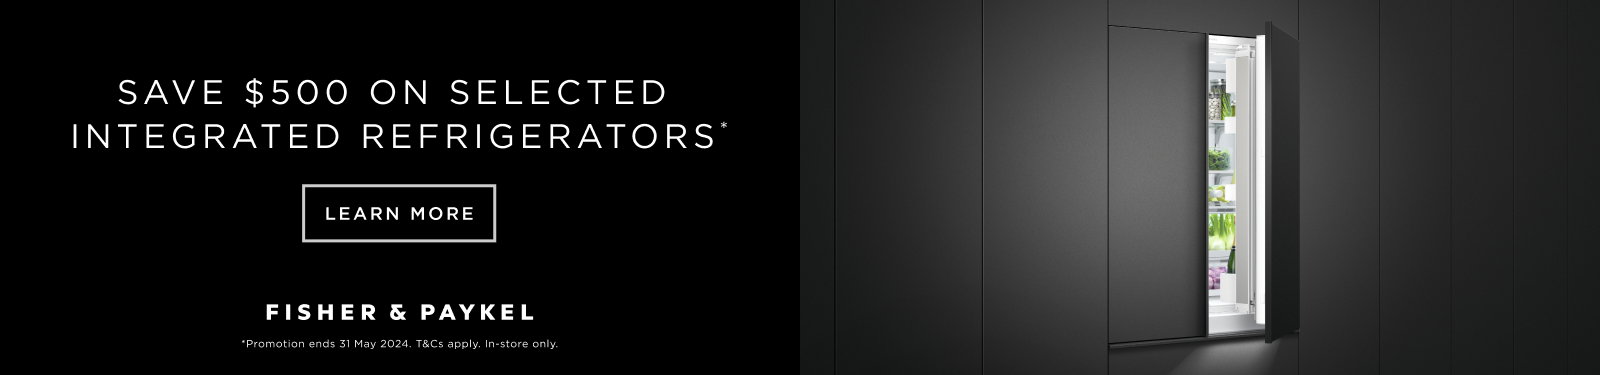 Save Up To $500 On Selected Fisher & Paykel Integrated Refrigerators at Retravision